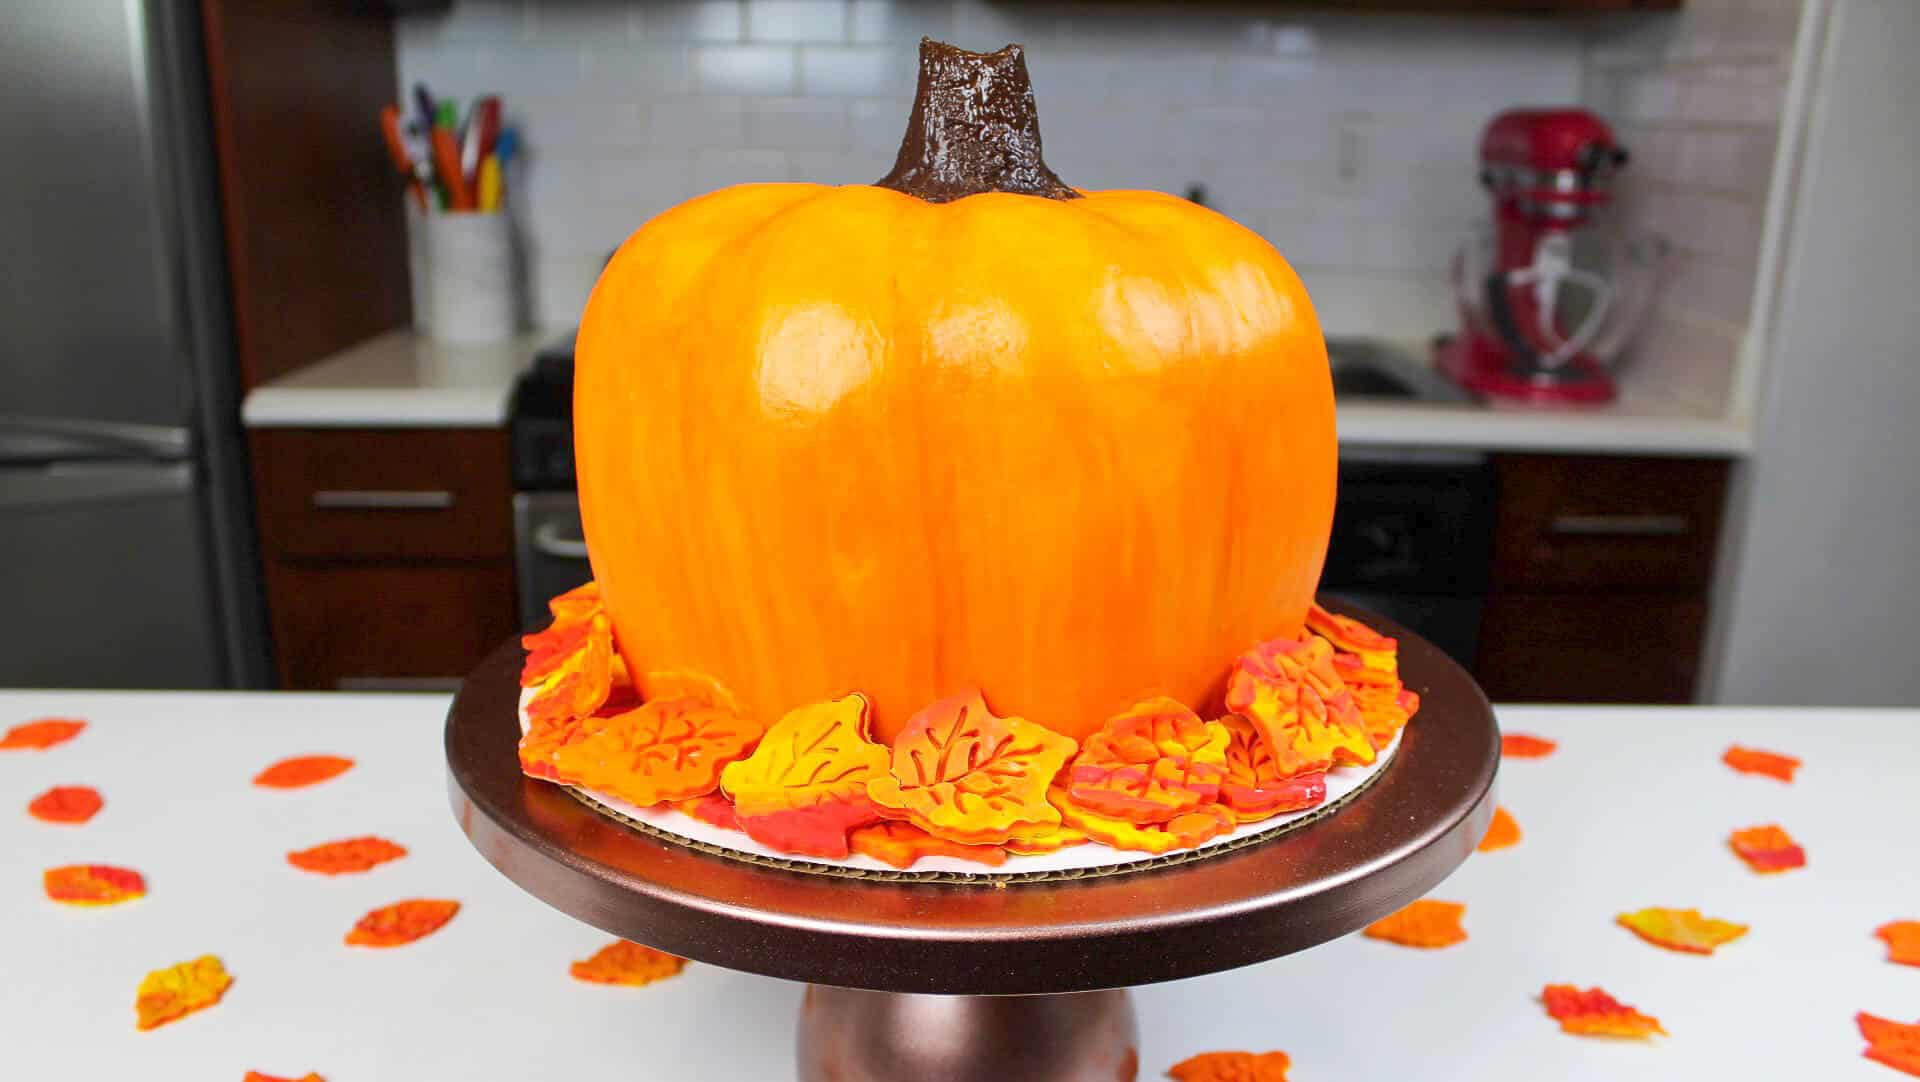 image of a pumpkin shaped cake made with buttercream